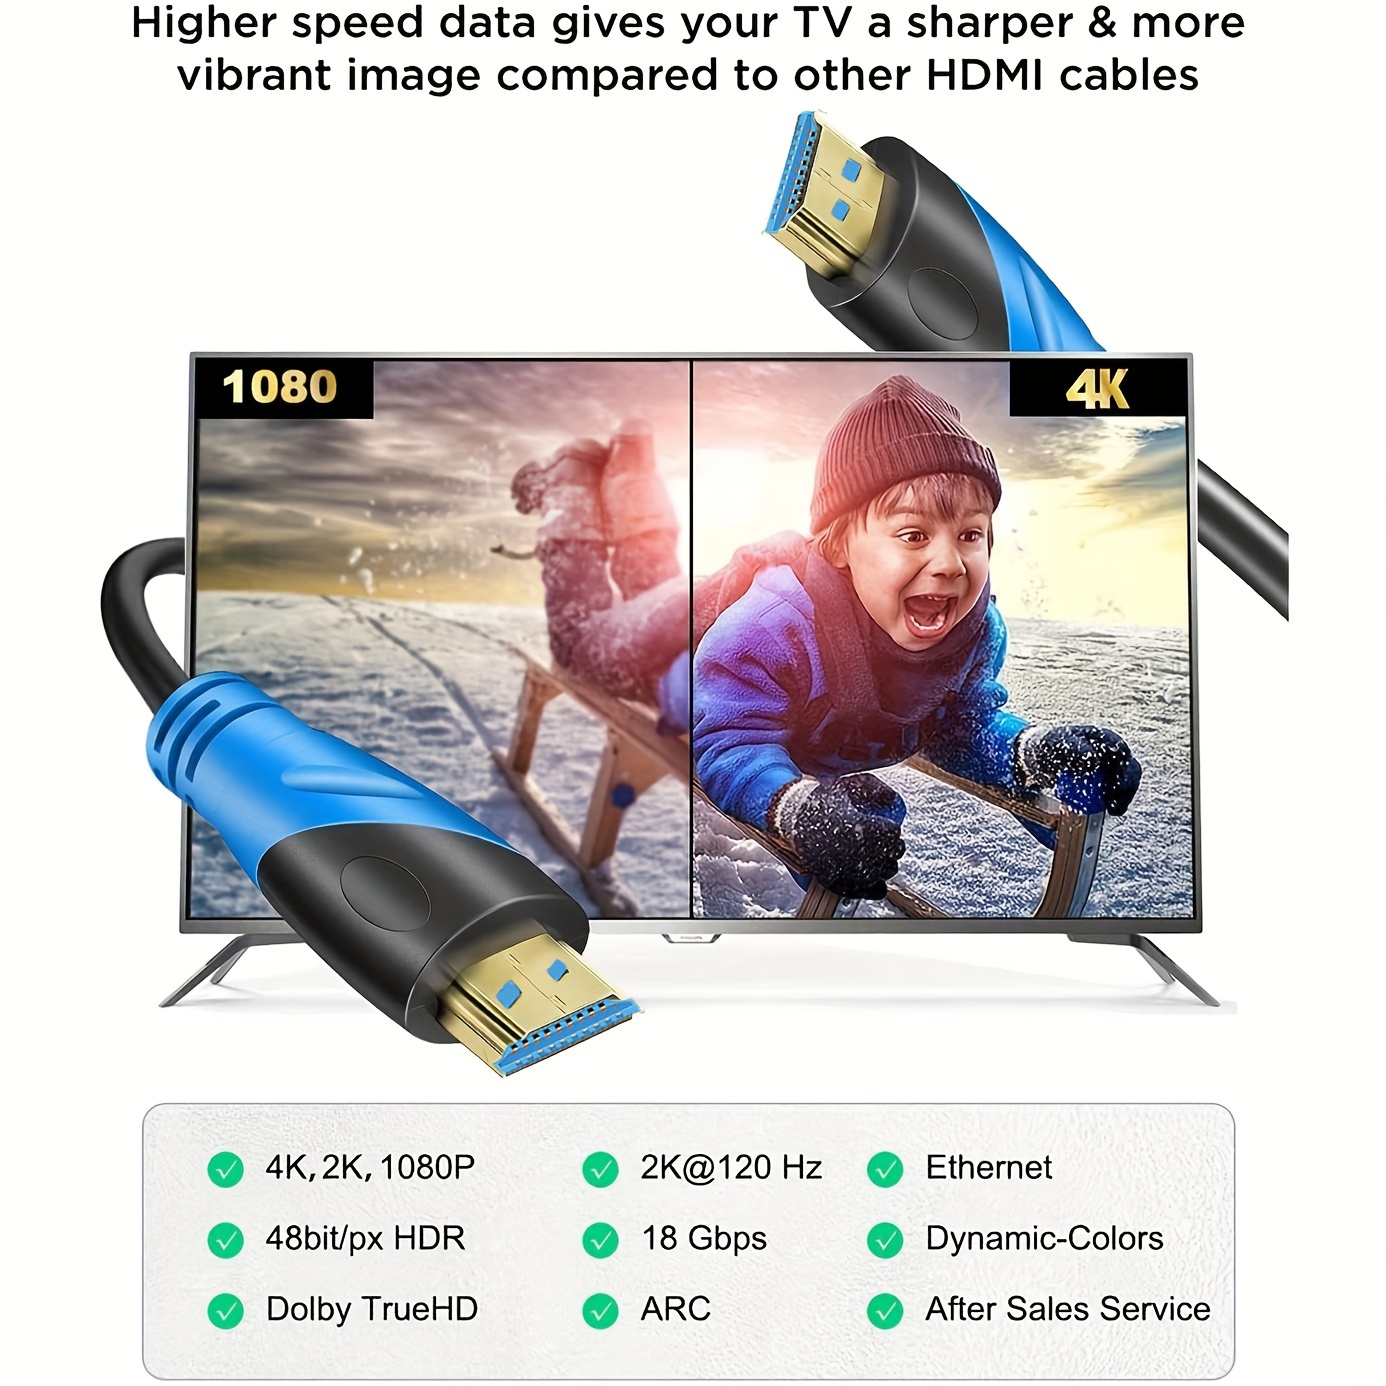 HDMI 4K Cable 4K@60hz HDR UHD 2K,1080P 48 bit/px HDR ARC Compatible 18Gbps